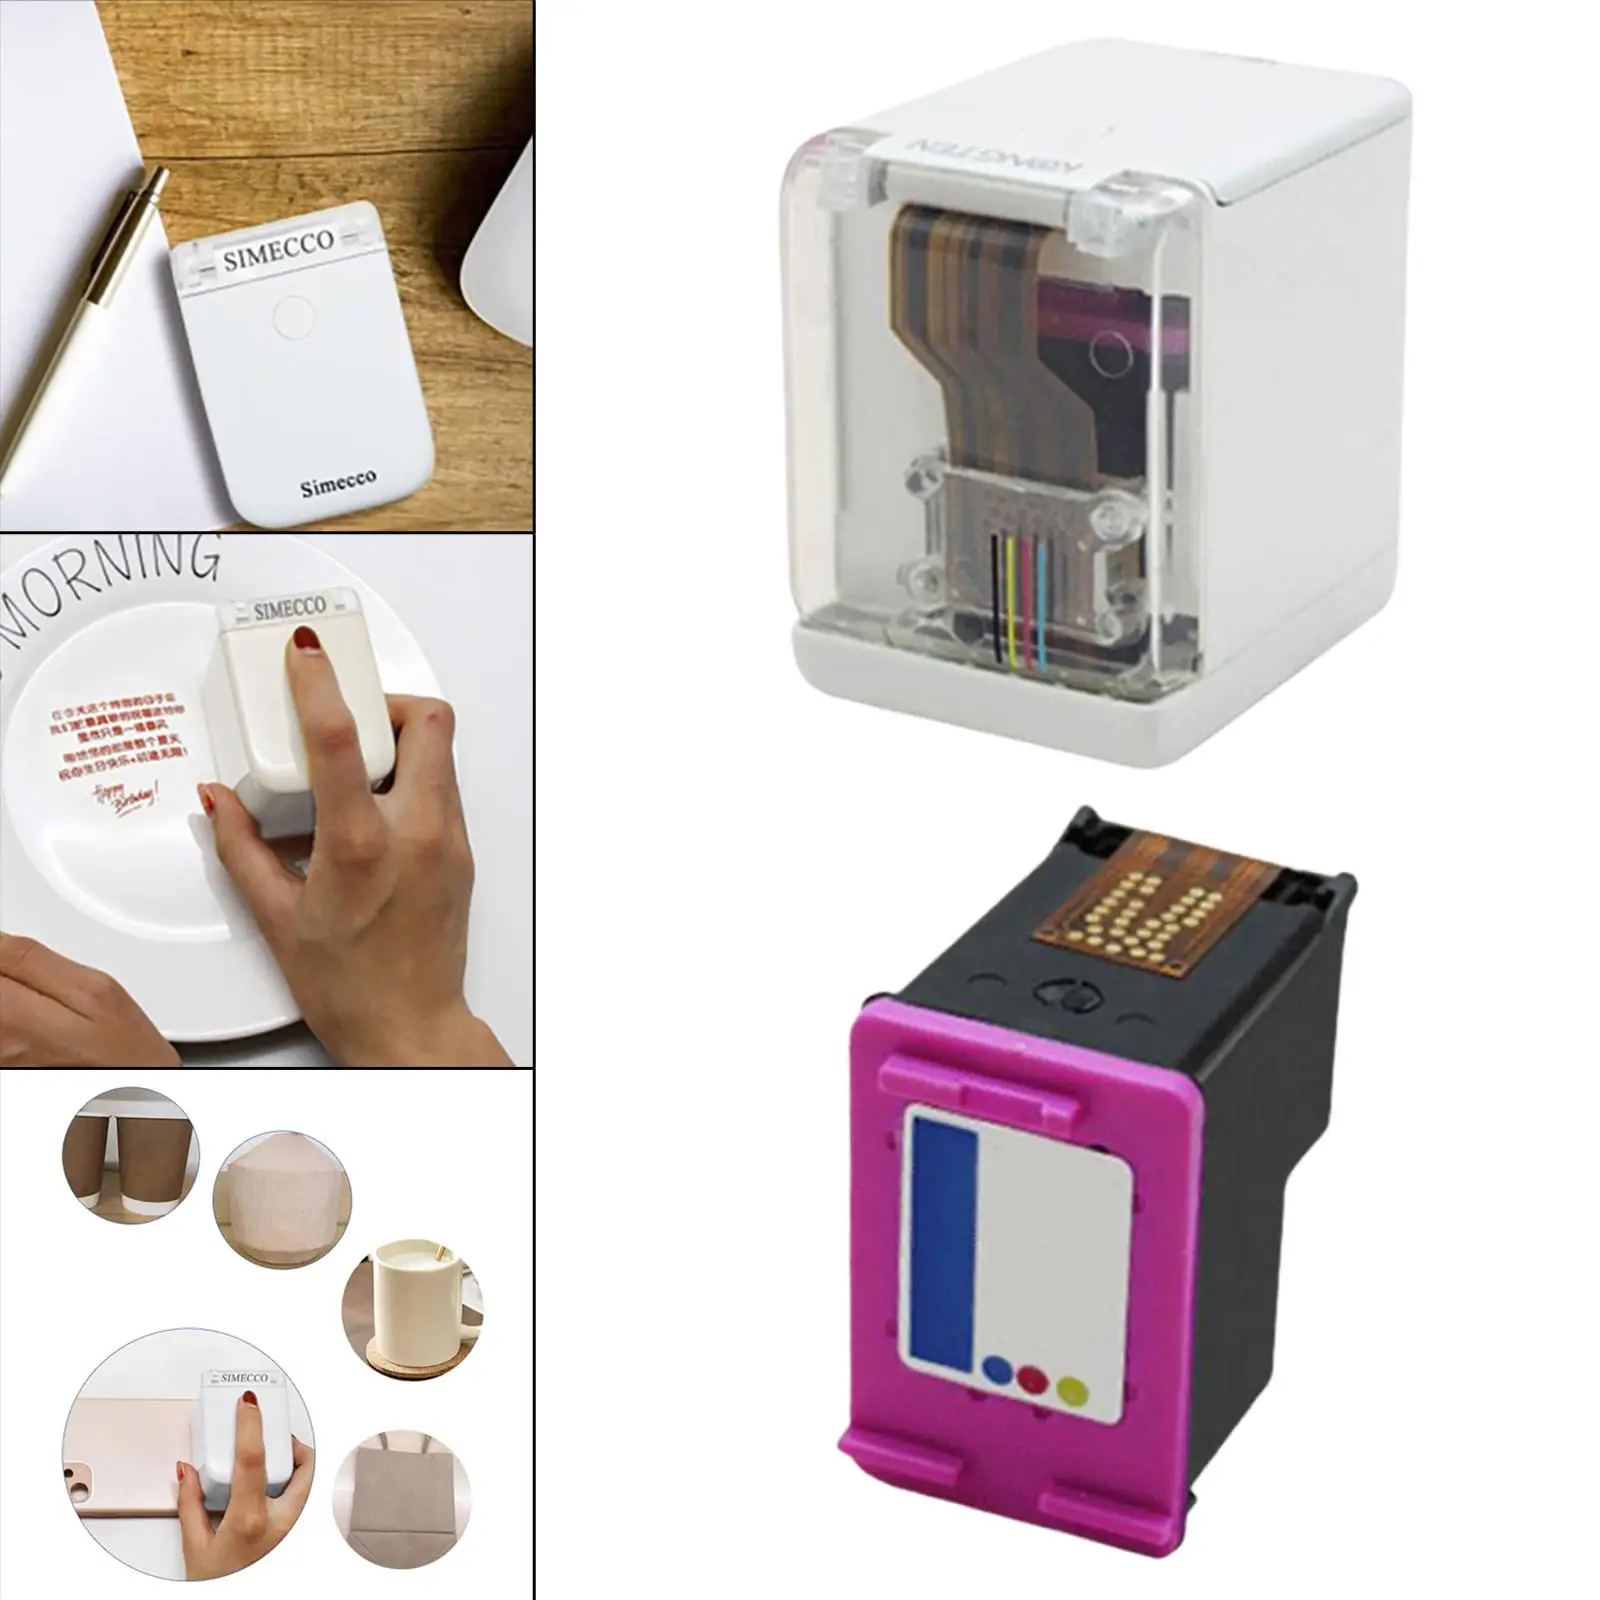 Wireless WiFi Handheld Full Color Printer Qrcode Printer for All Materials